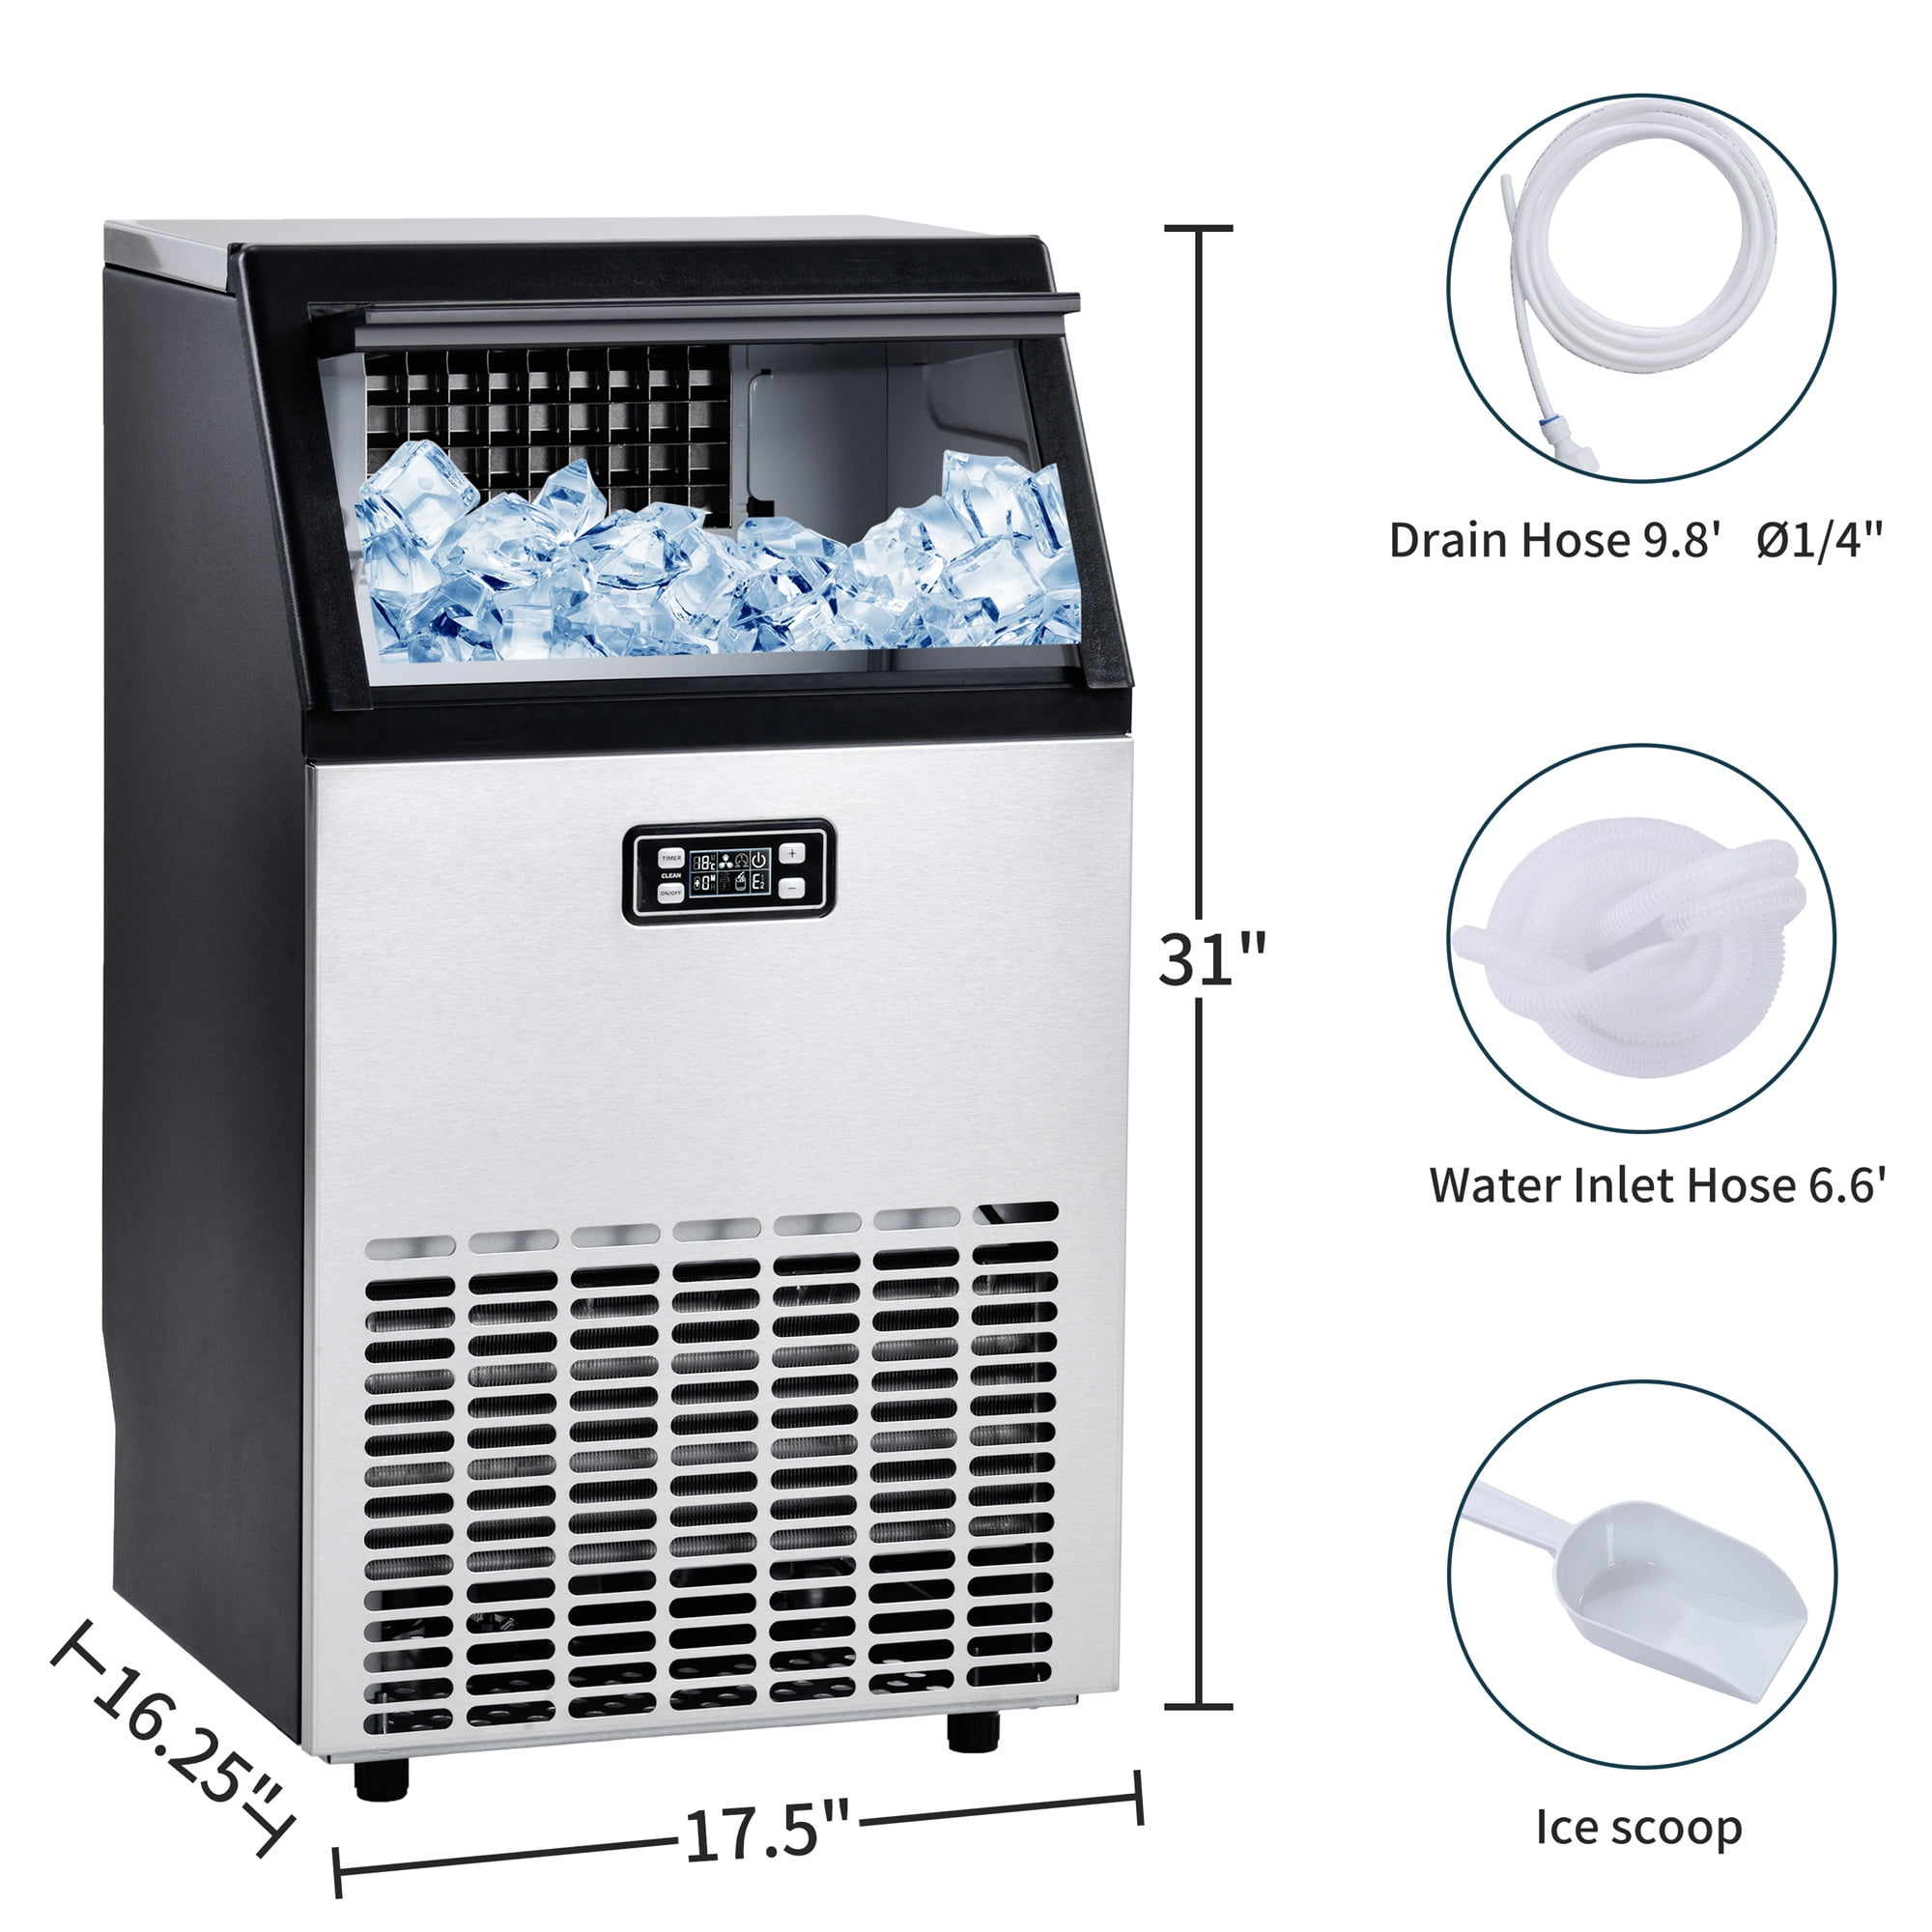 PRIBCHO Freestanding Commercial Ice Maker Machine,Makes 90 Pounds Ice in 24 hrs with 22 Pounds Storage Capacity,Stainless Steel Industrial Freestanding Ice Maker,Under Counter ice Maker 1, 90LB 